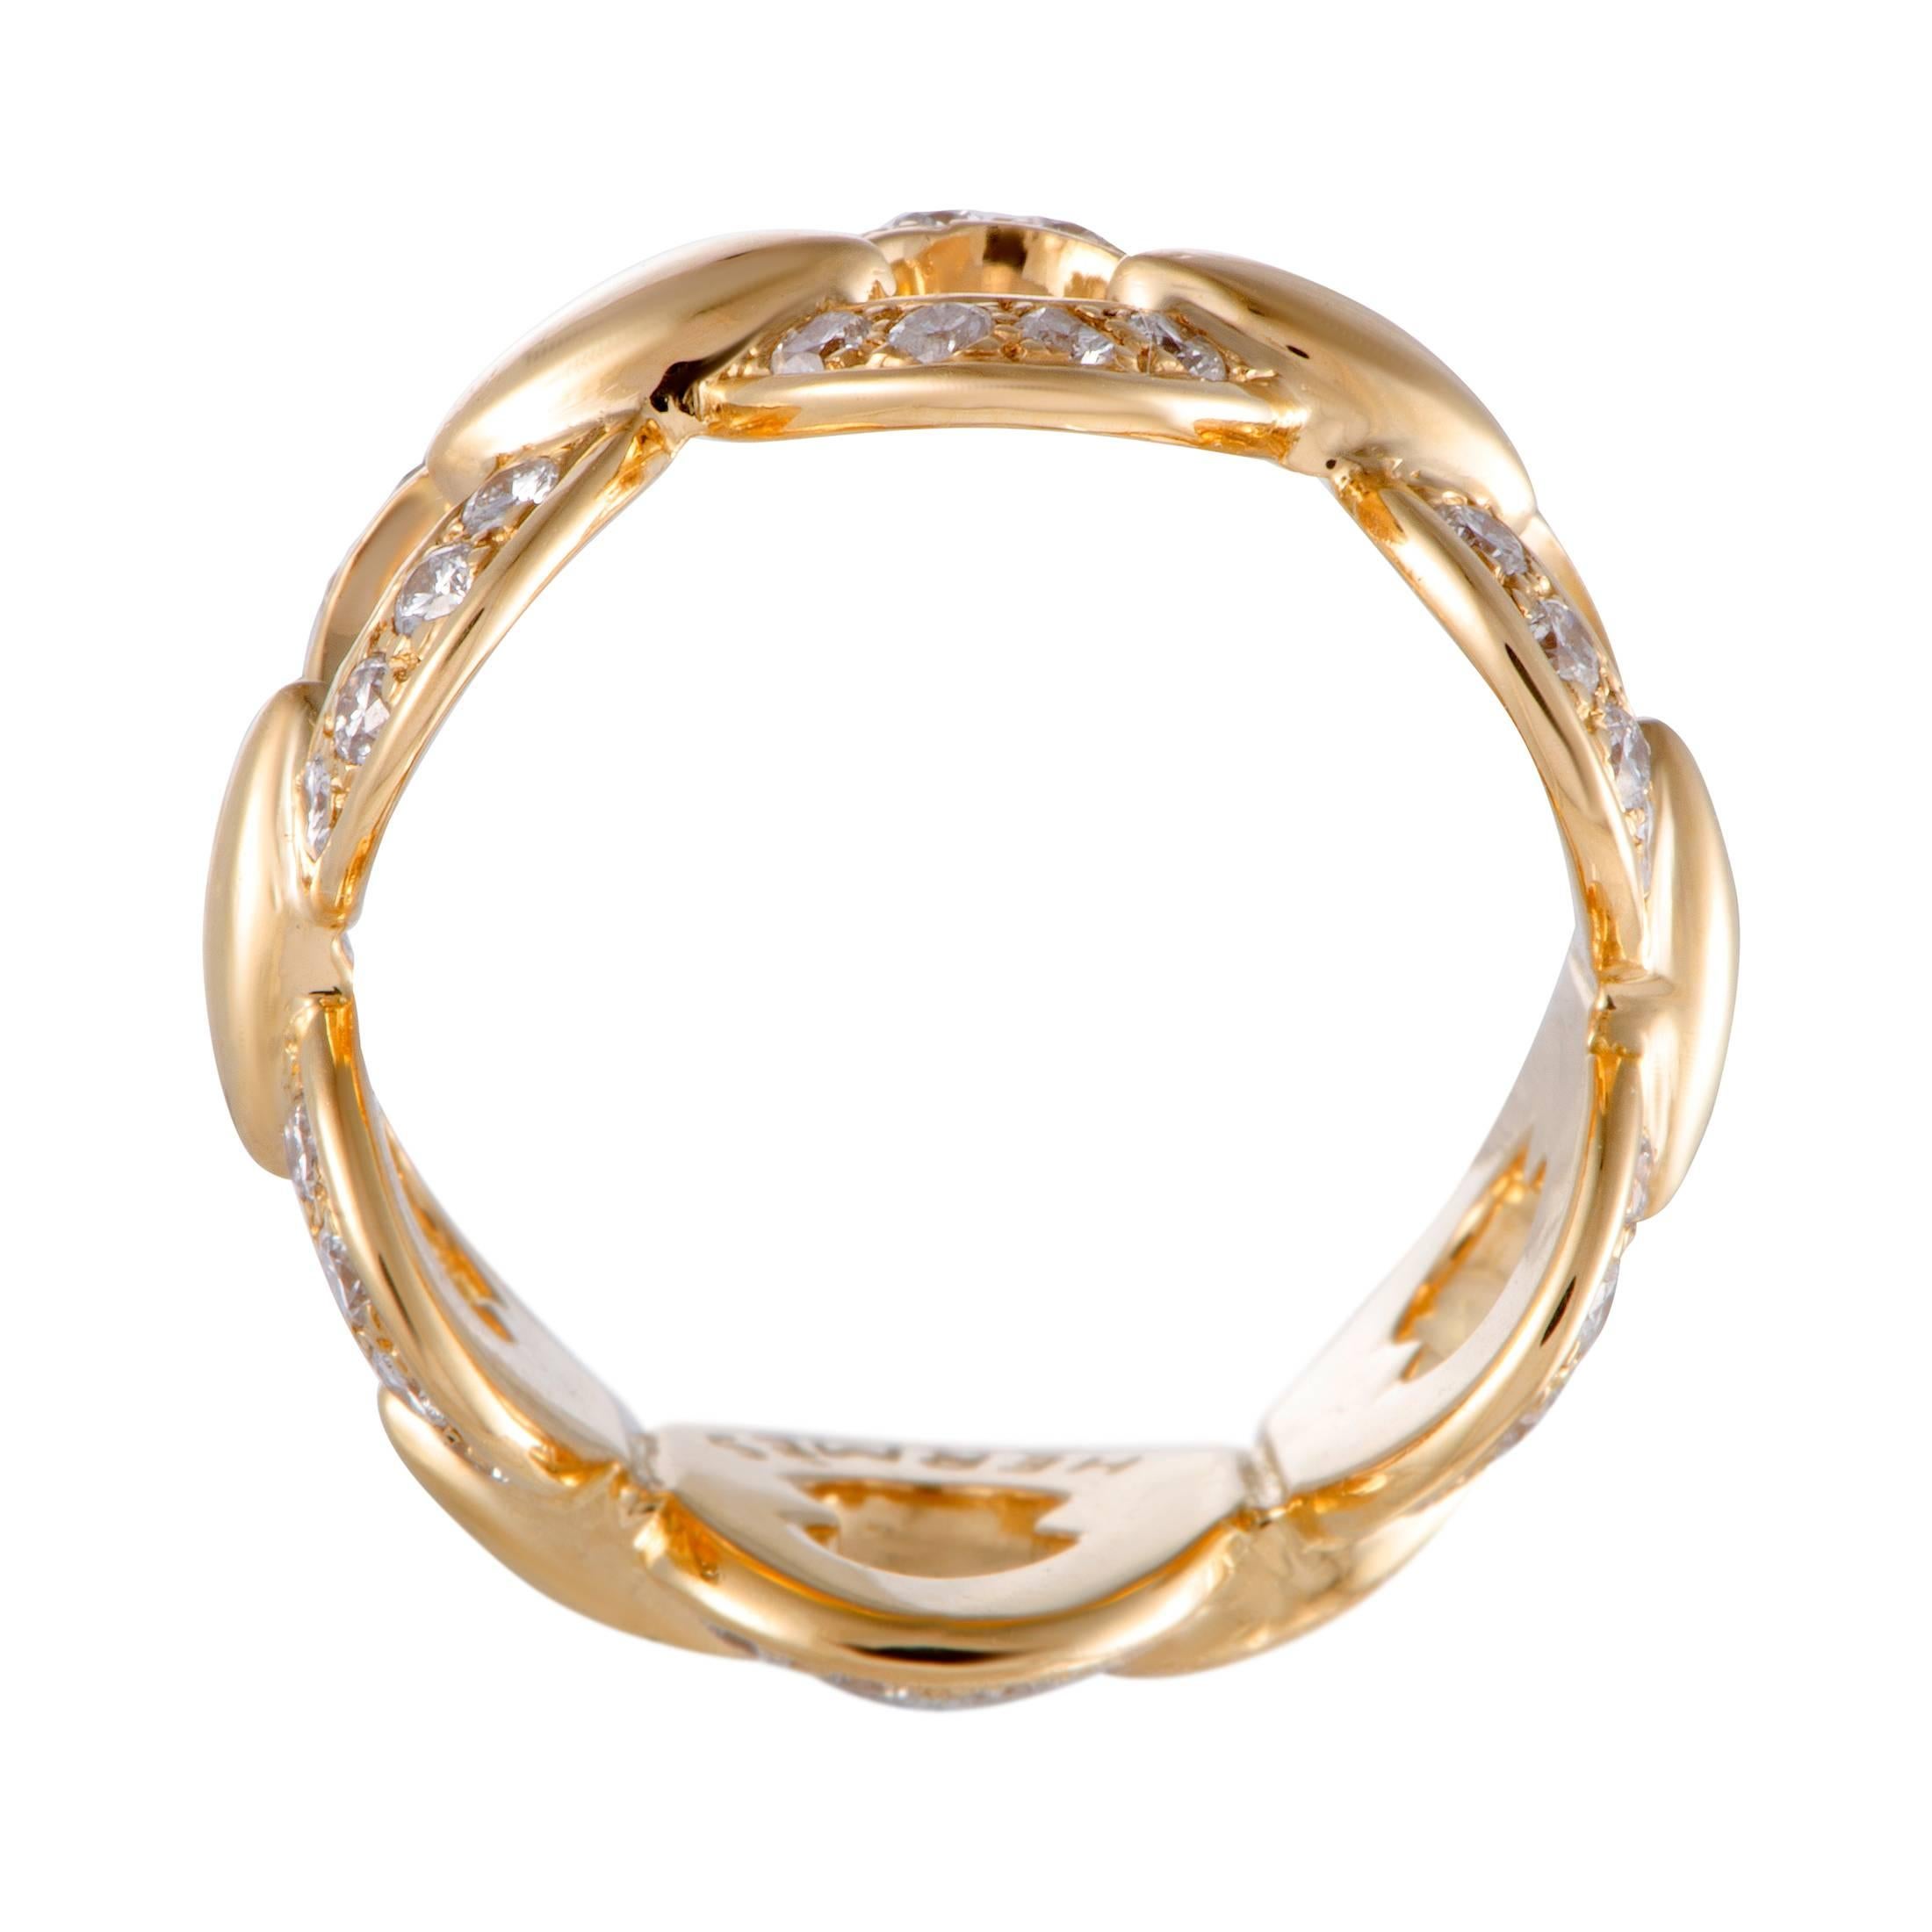 Style and elegance are embodied in this gorgeous 18K yellow gold ring by Hermès. The sensational ring's design sparkles with a stunning pave of sparkling diamonds, weighing 0.75ct, that reflects the luxurious value of the beautiful piece.
Band